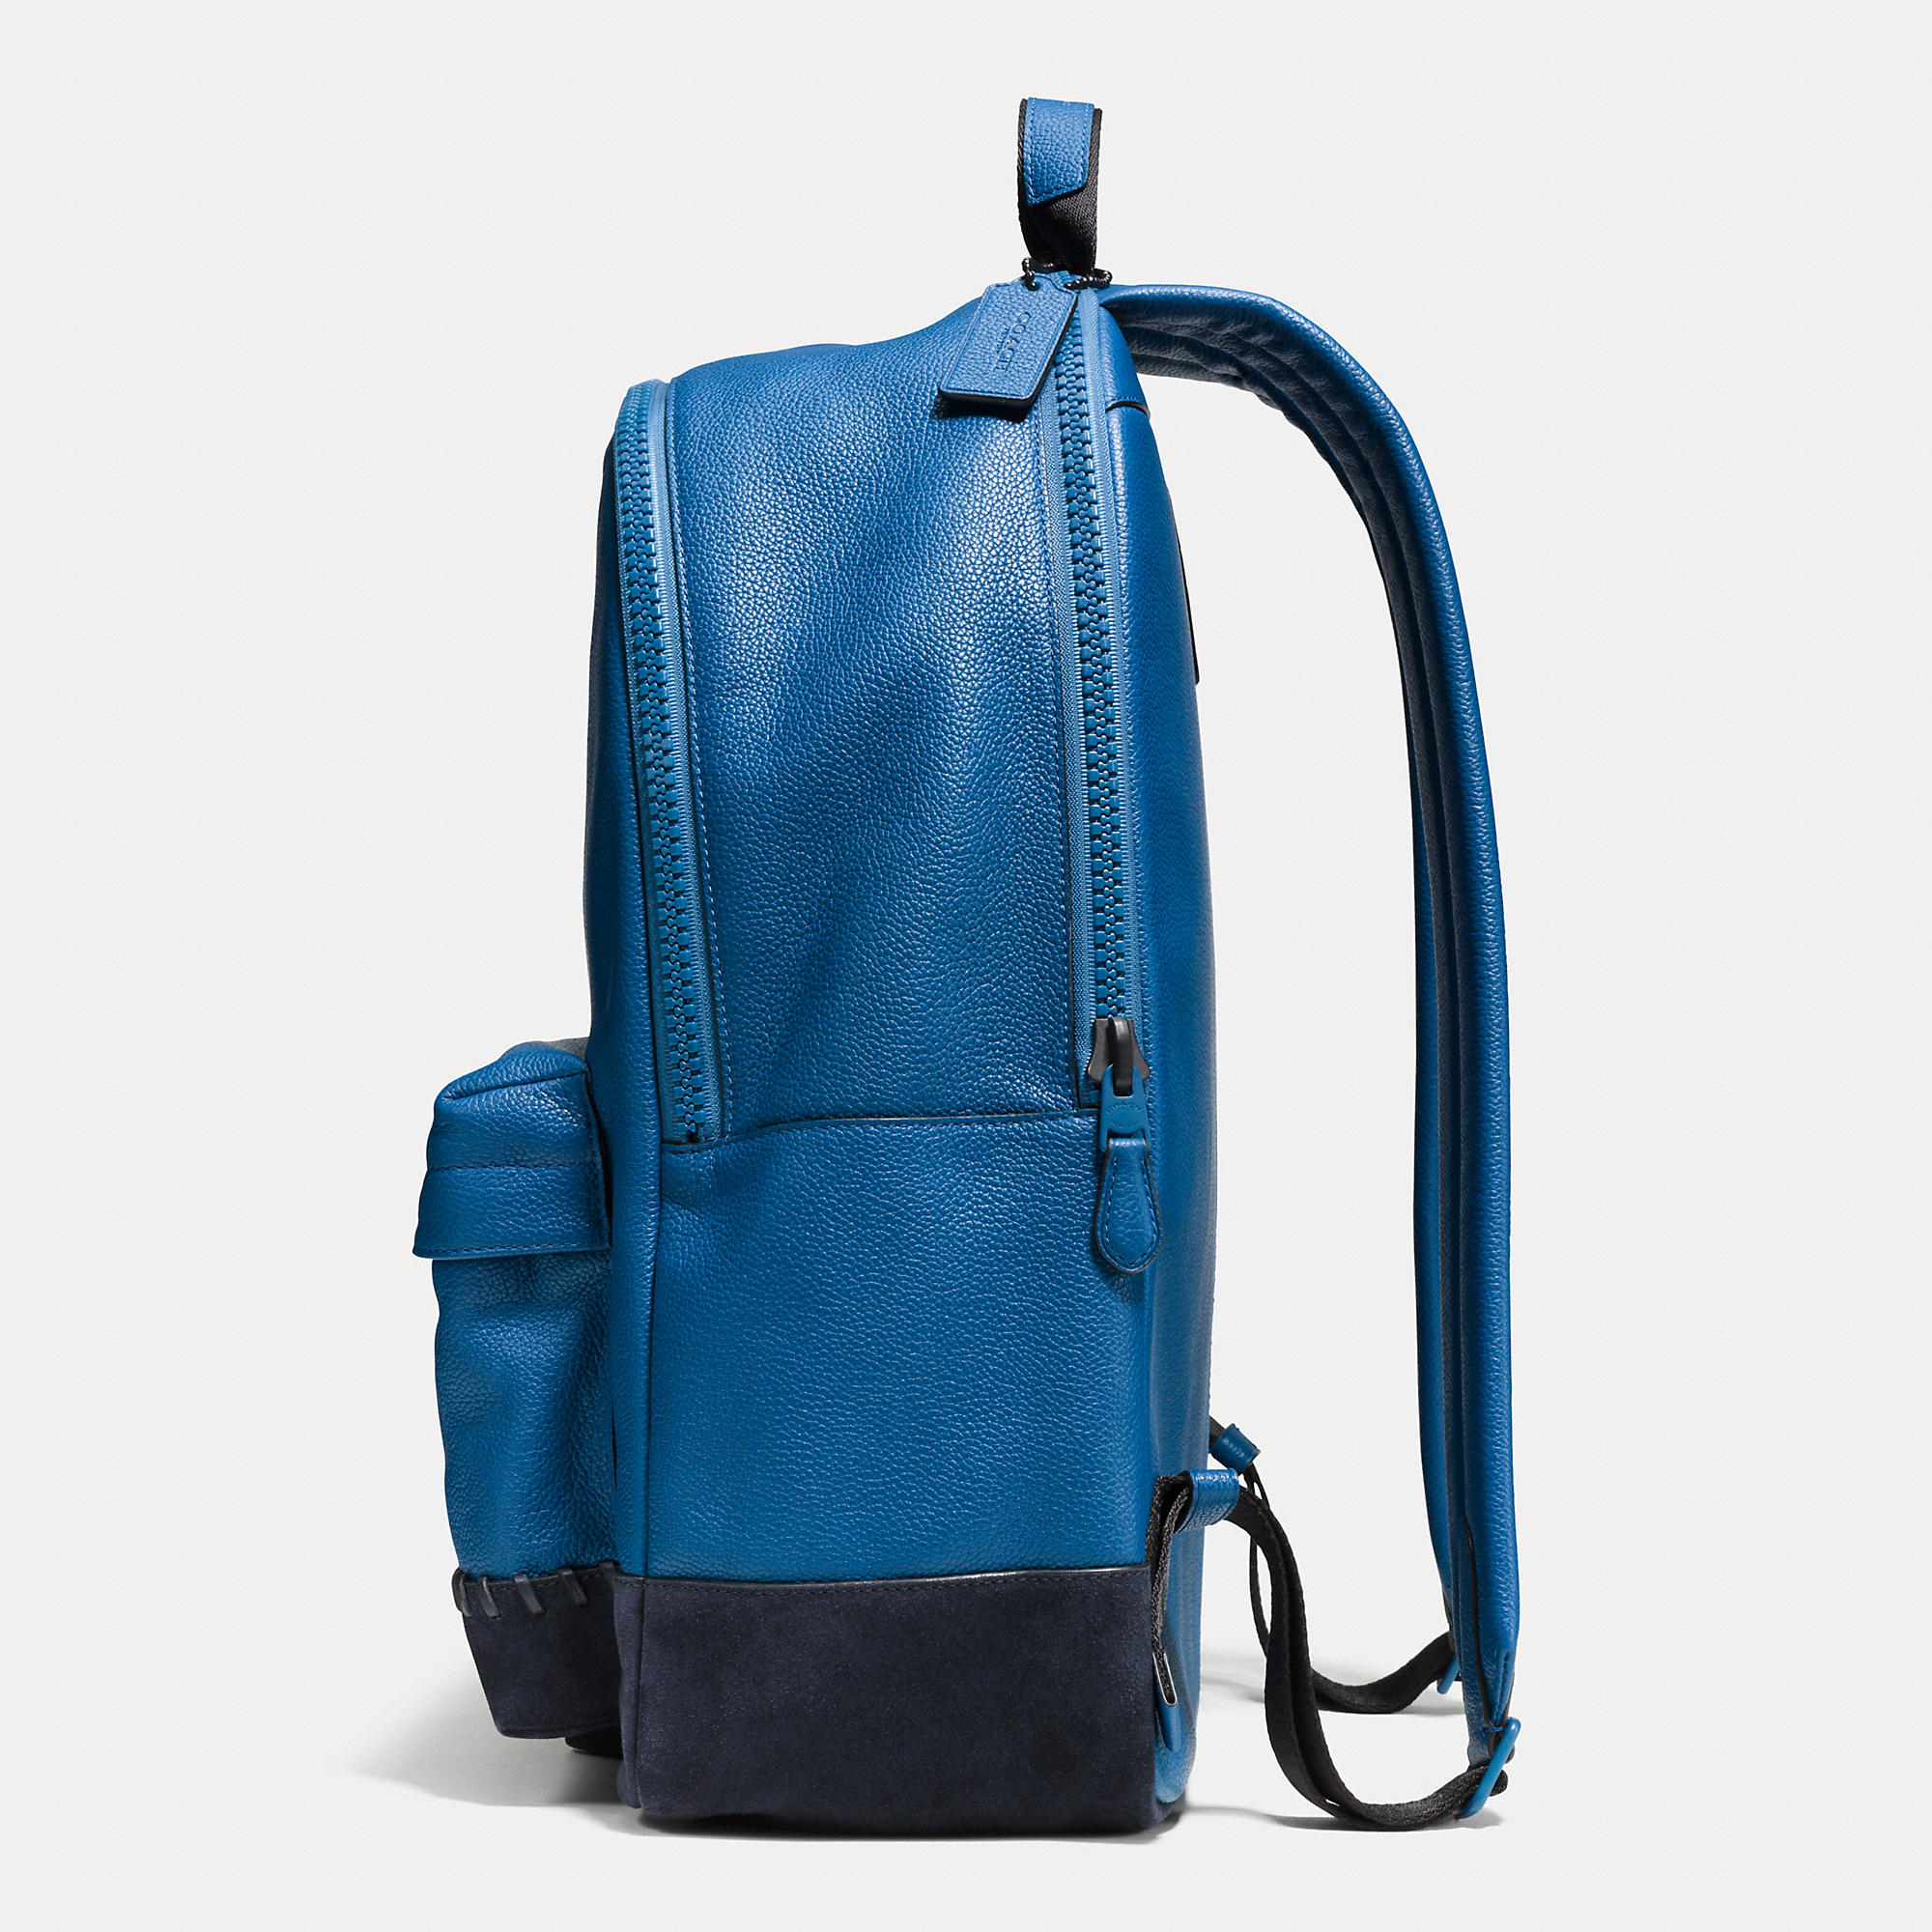 Lyst - Coach Modern Varsity Campus Backpack In Pebble Leather in Blue for Men